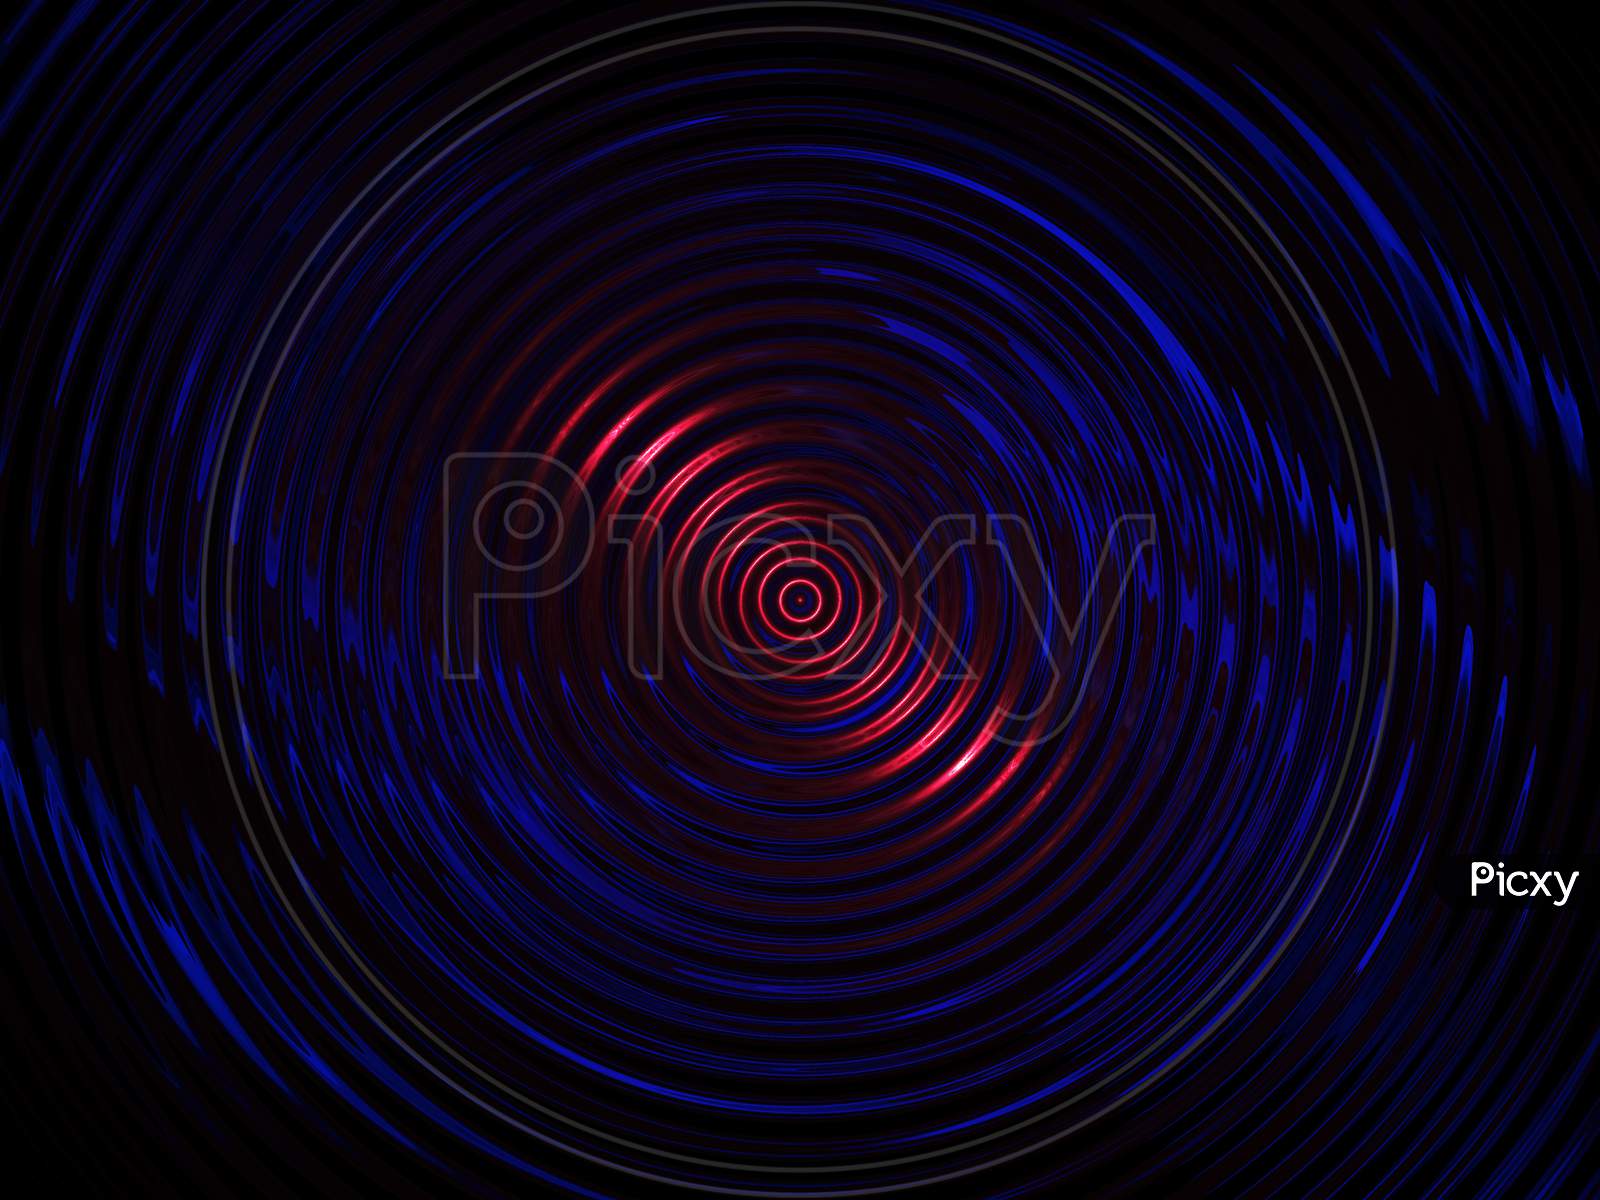 Rounding Frame Blue Art Texture Raster Image Digital Creation Graphic Vector Abstract.